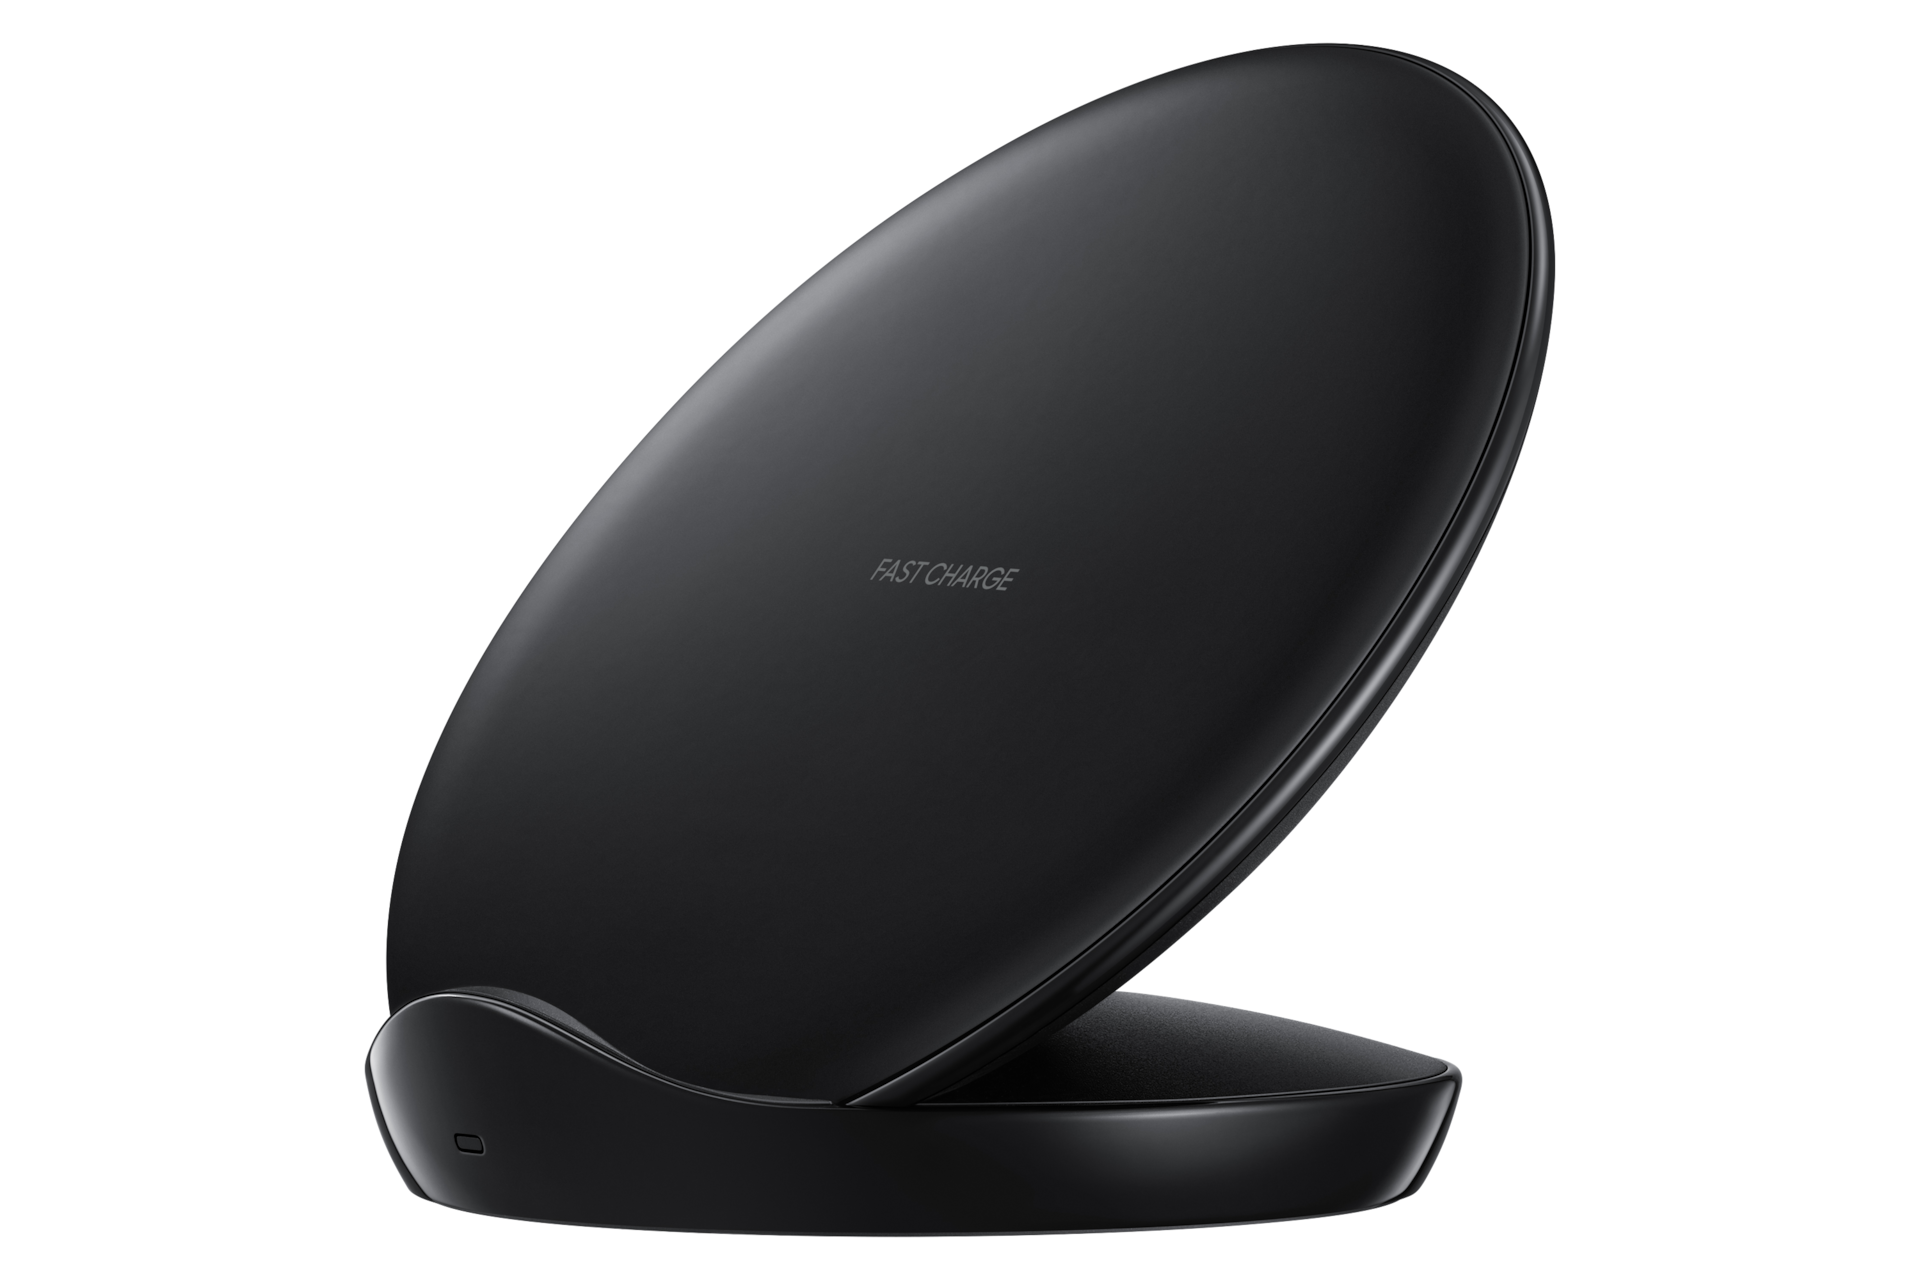 https://images.samsung.com/is/image/samsung/uk-wireless-charger-stand-afc-ep-n5100-ep-n5100tbeggb-dynamicblack-125067246?$650_519_PNG$